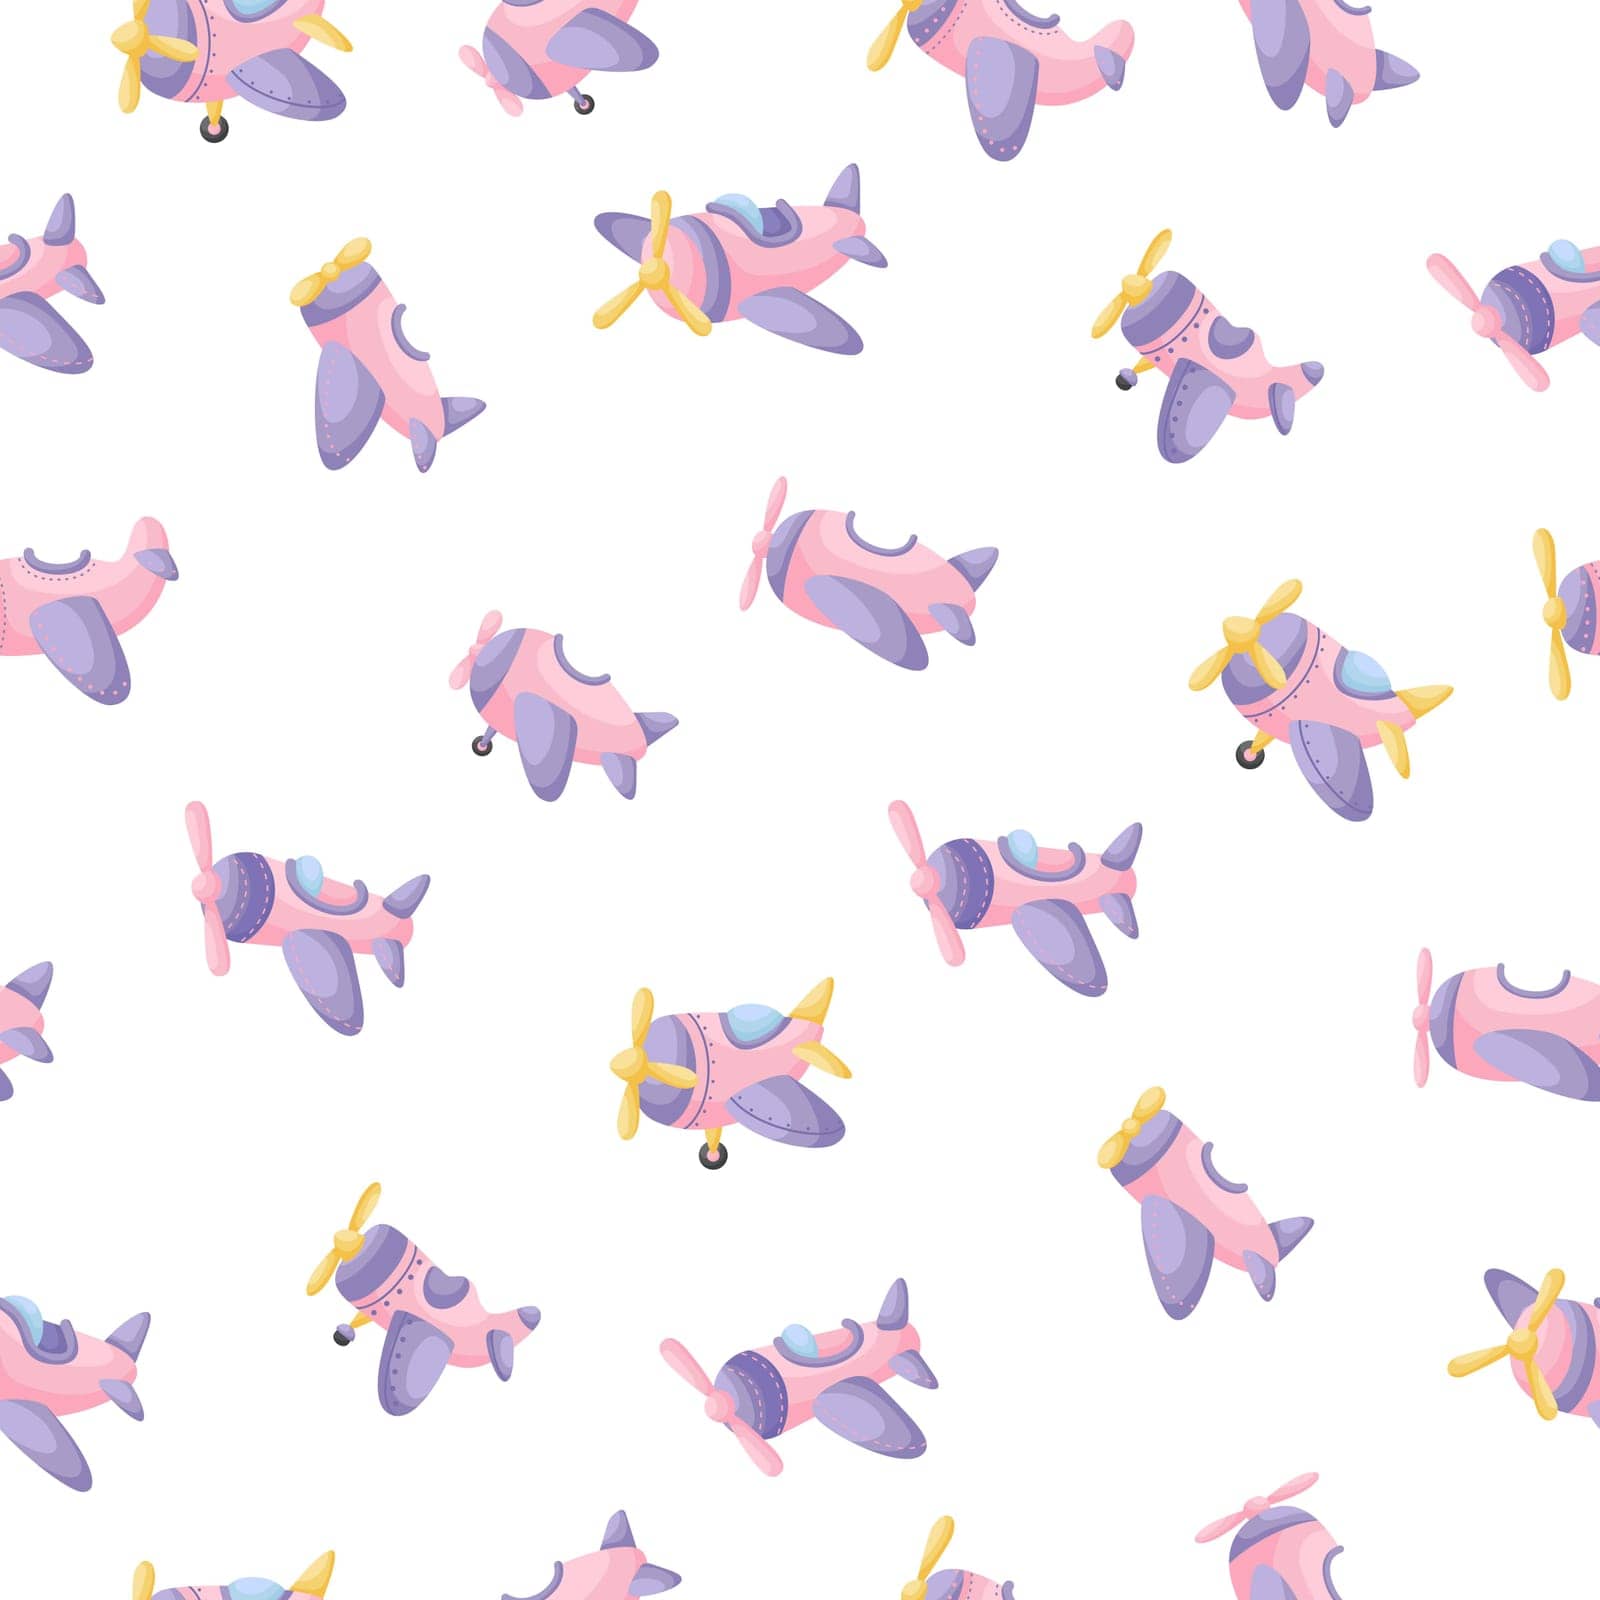 Cute children's seamless pattern with pink planes. Creative kids texture for fabric, wrapping, textile, wallpaper, apparel. Vector illustration.